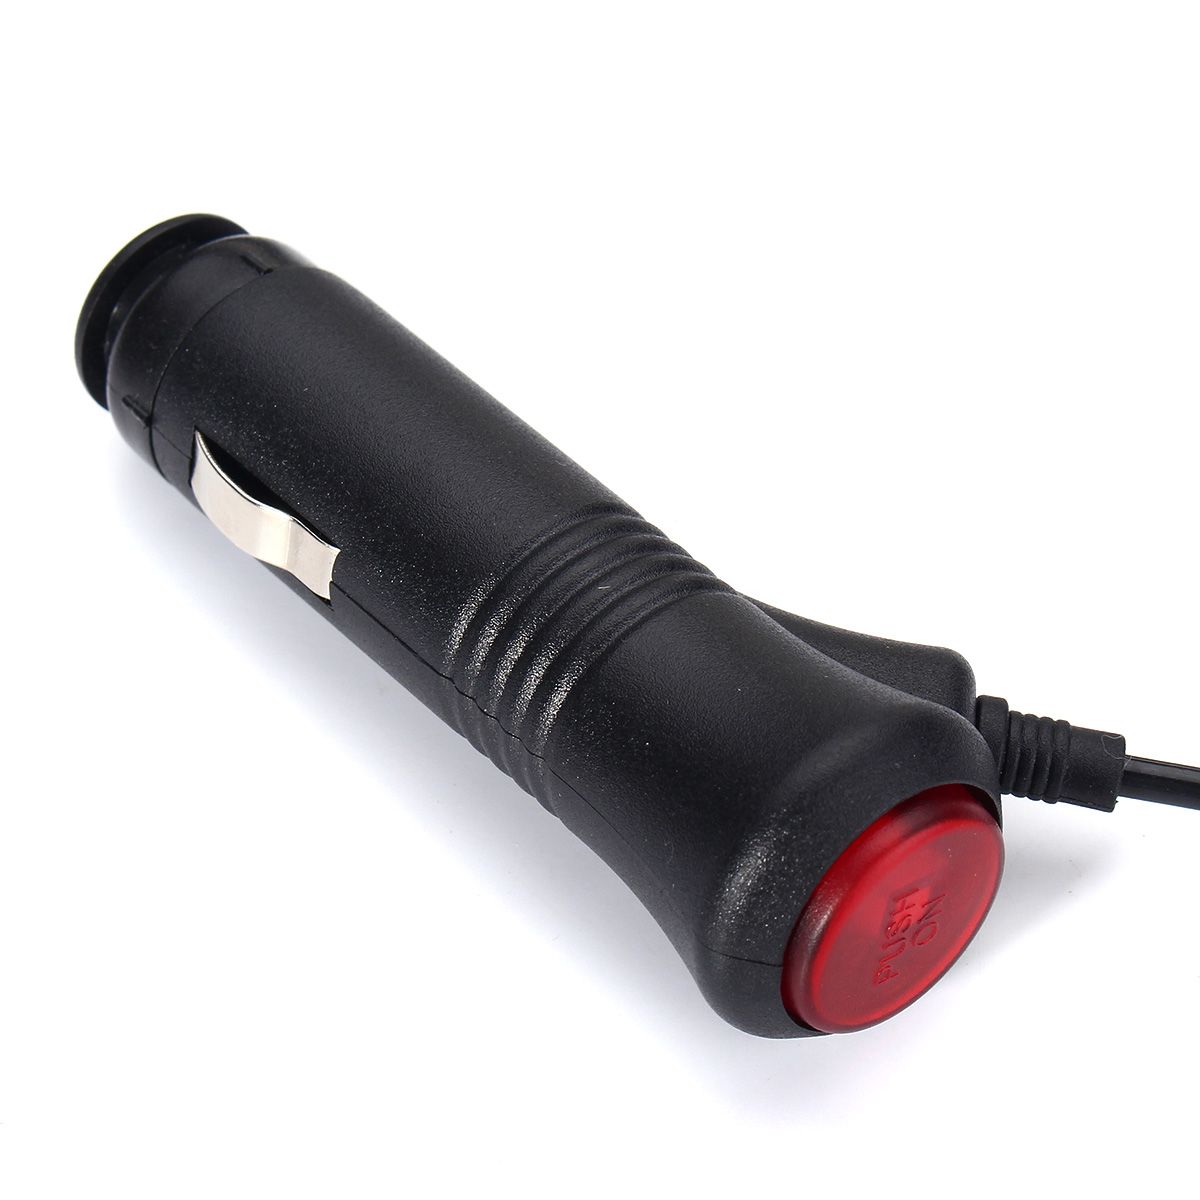 12-LED-Strobe-Lights-Suction-Cup-Car-Windshield-Emergency-Warning-Lamp-with-12V-Lighter-Adapter-1585564